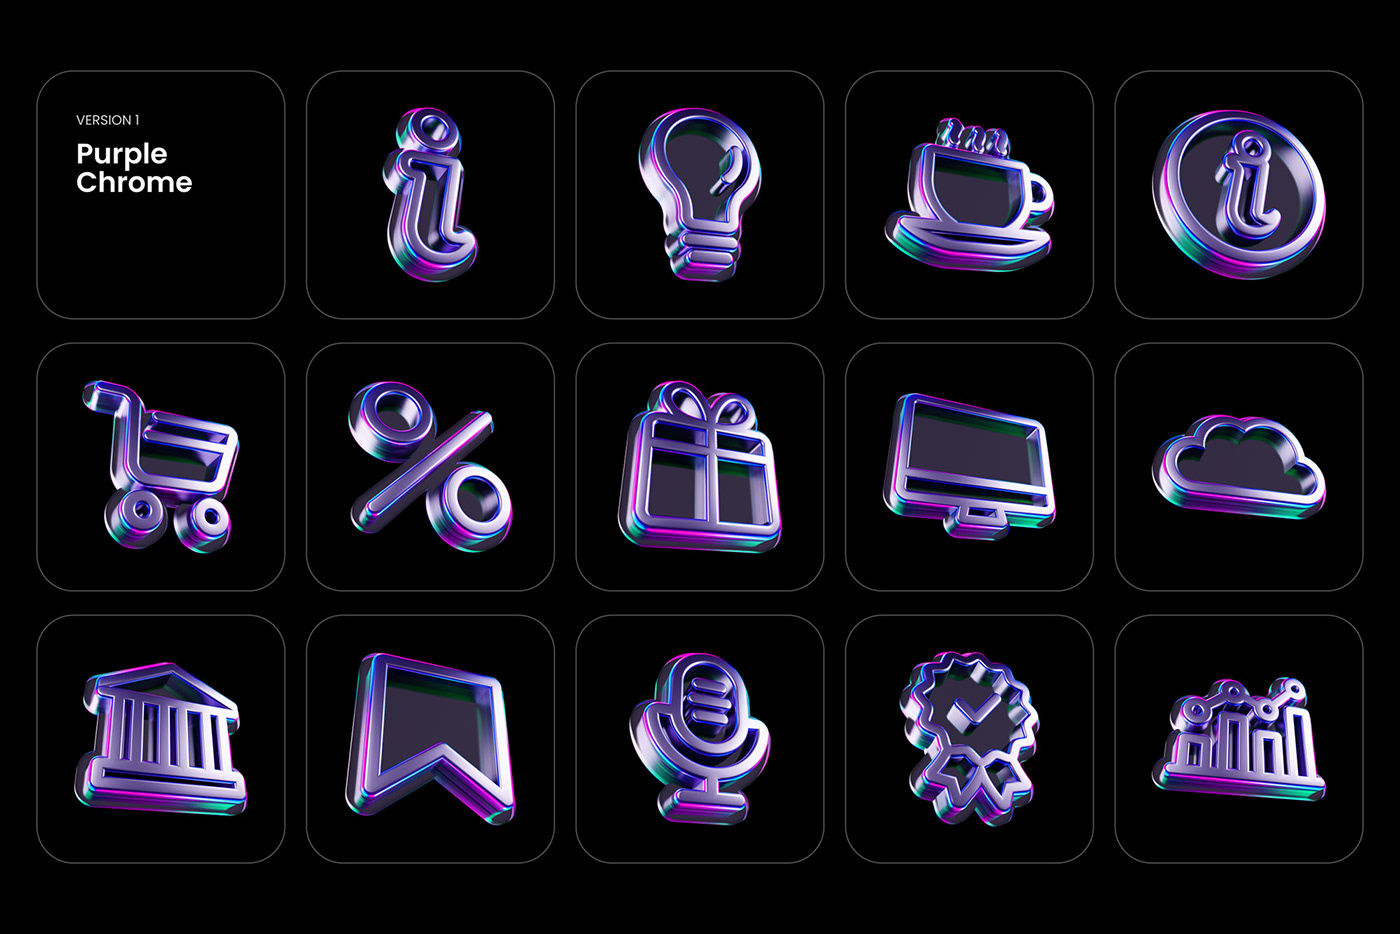 3D 3d icons icons glossy chrome assets resources download 3D illustration purple